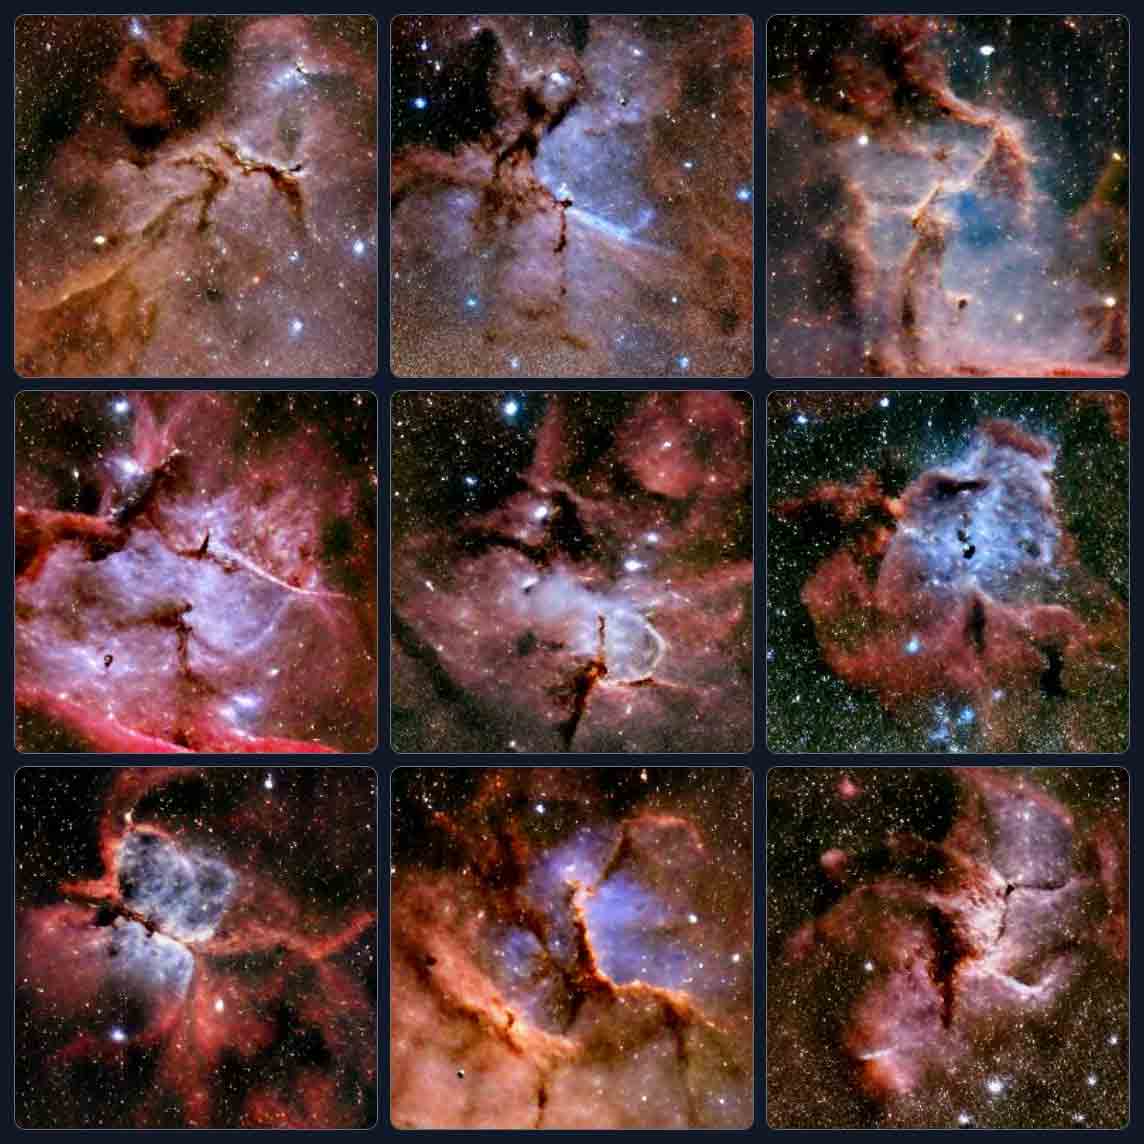 9 images showing variations on supernova remnant nebulae, all seen from a great distance to capture entire nebula. They have chaotic whorls of gas and dust, generally following a red and amber color palette, with sections in blue. All are against rich star fields.